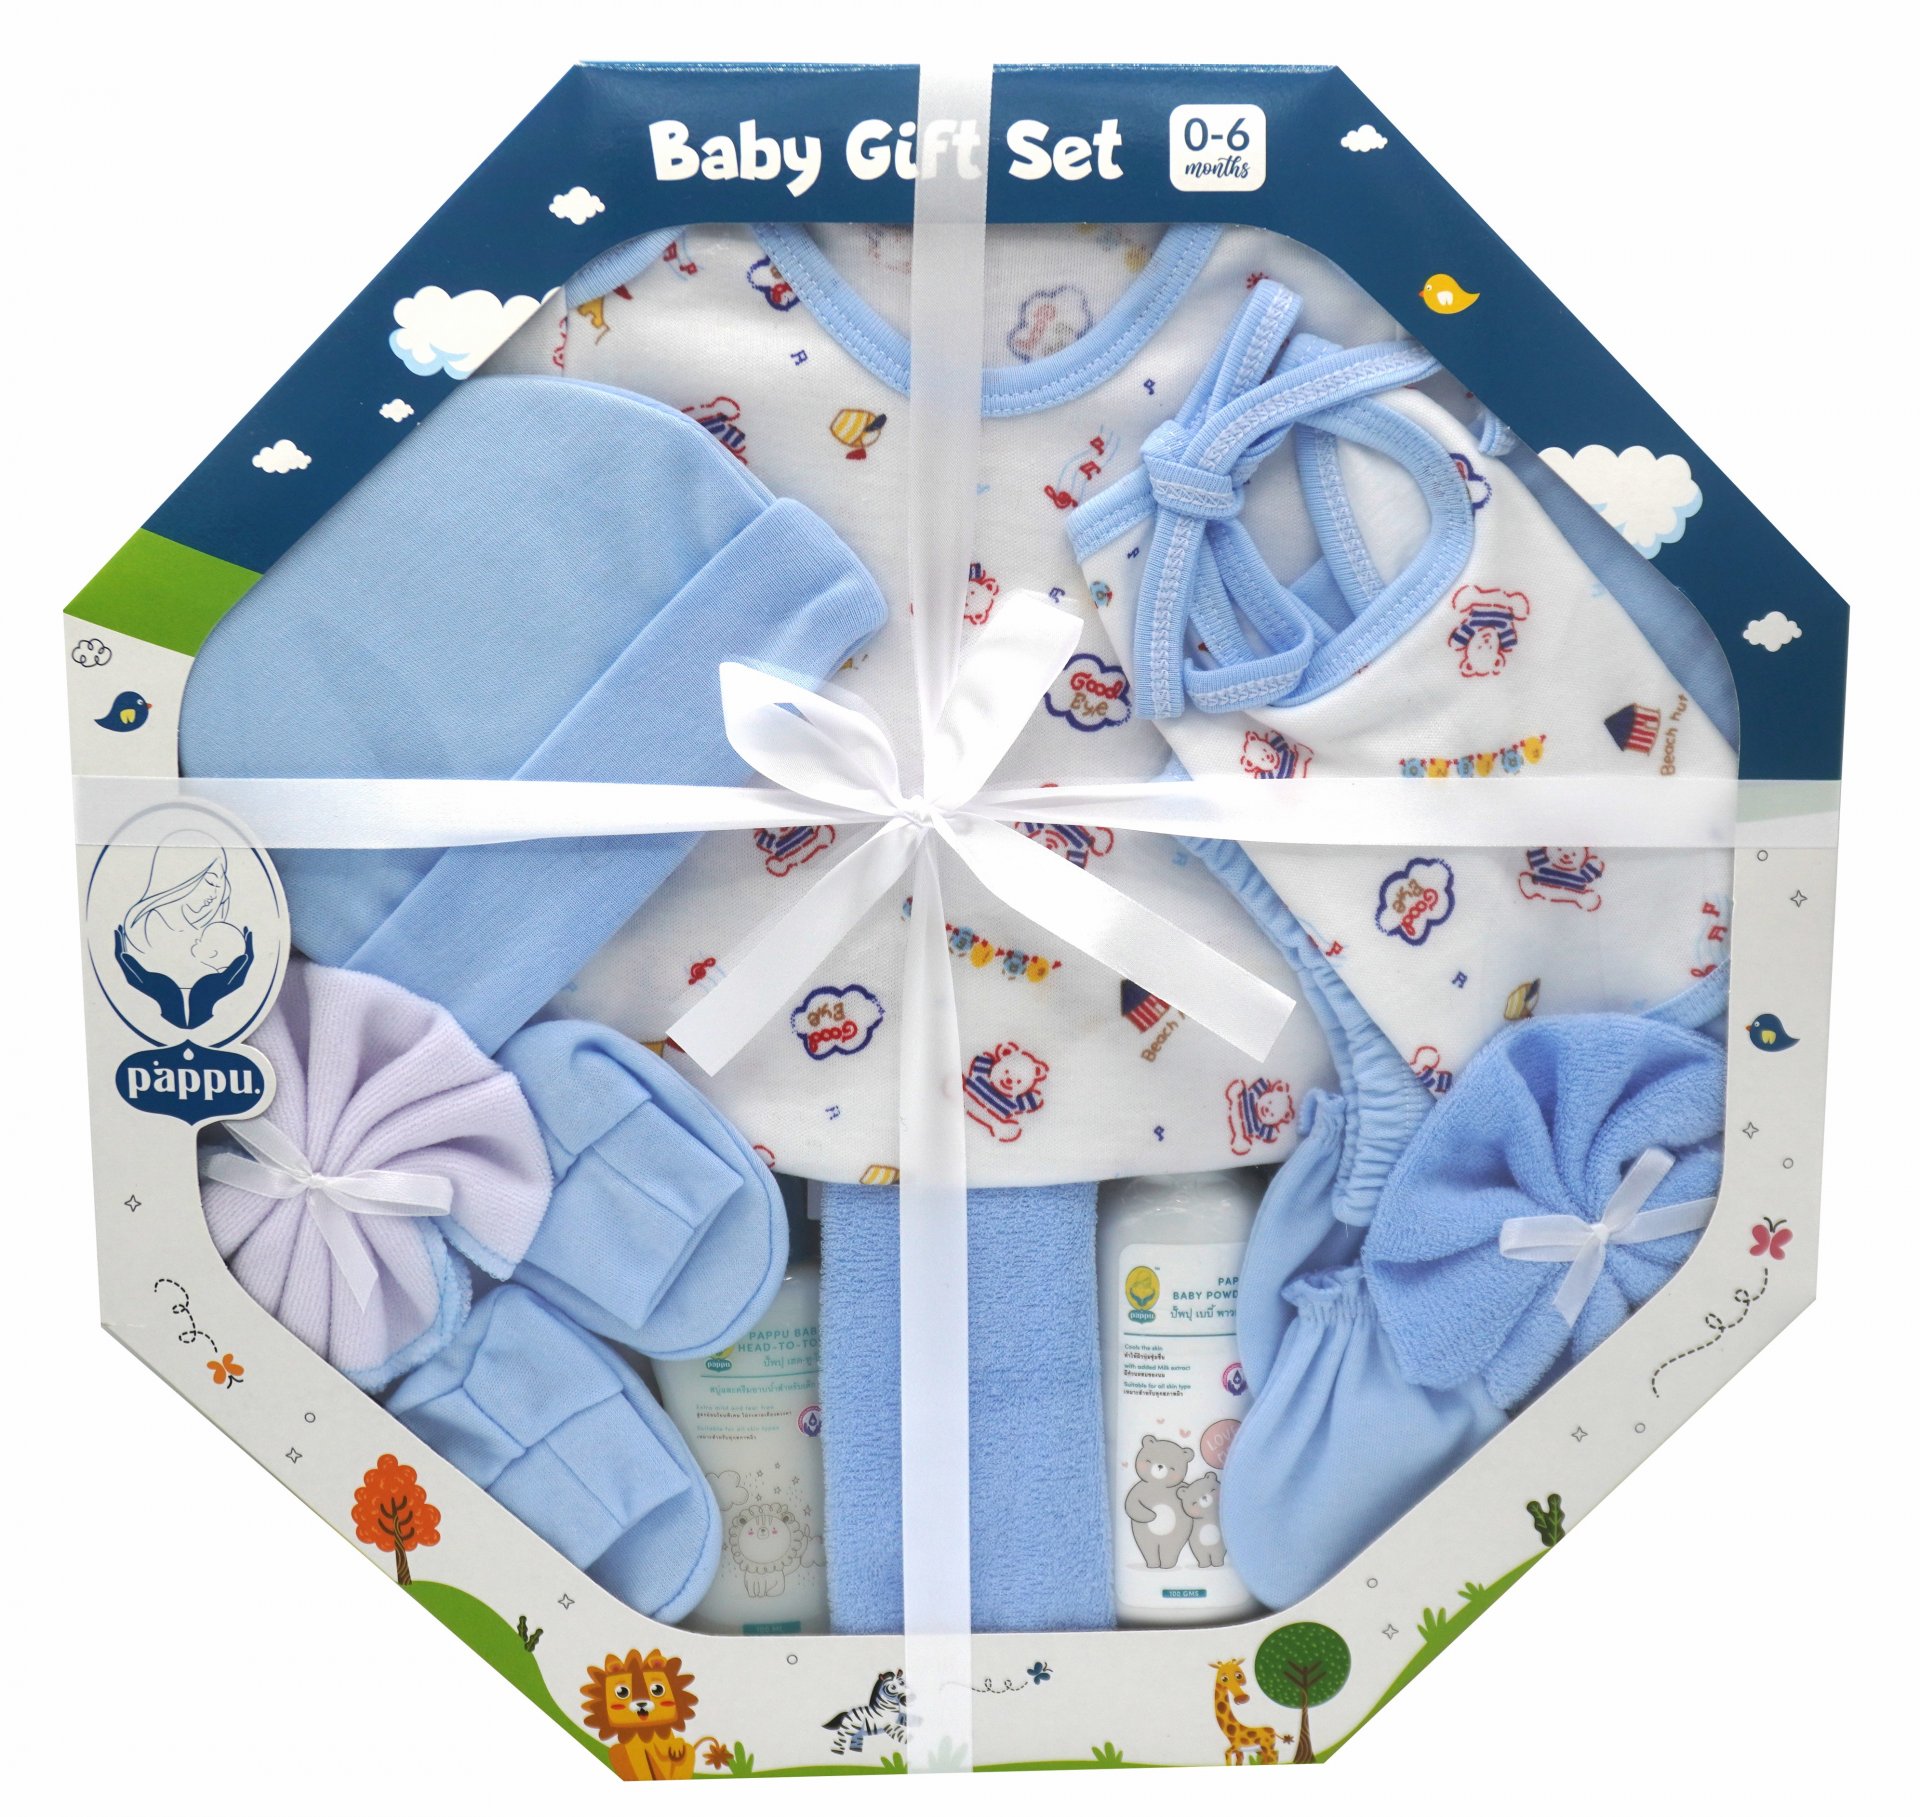 11 Pieces baby gift set